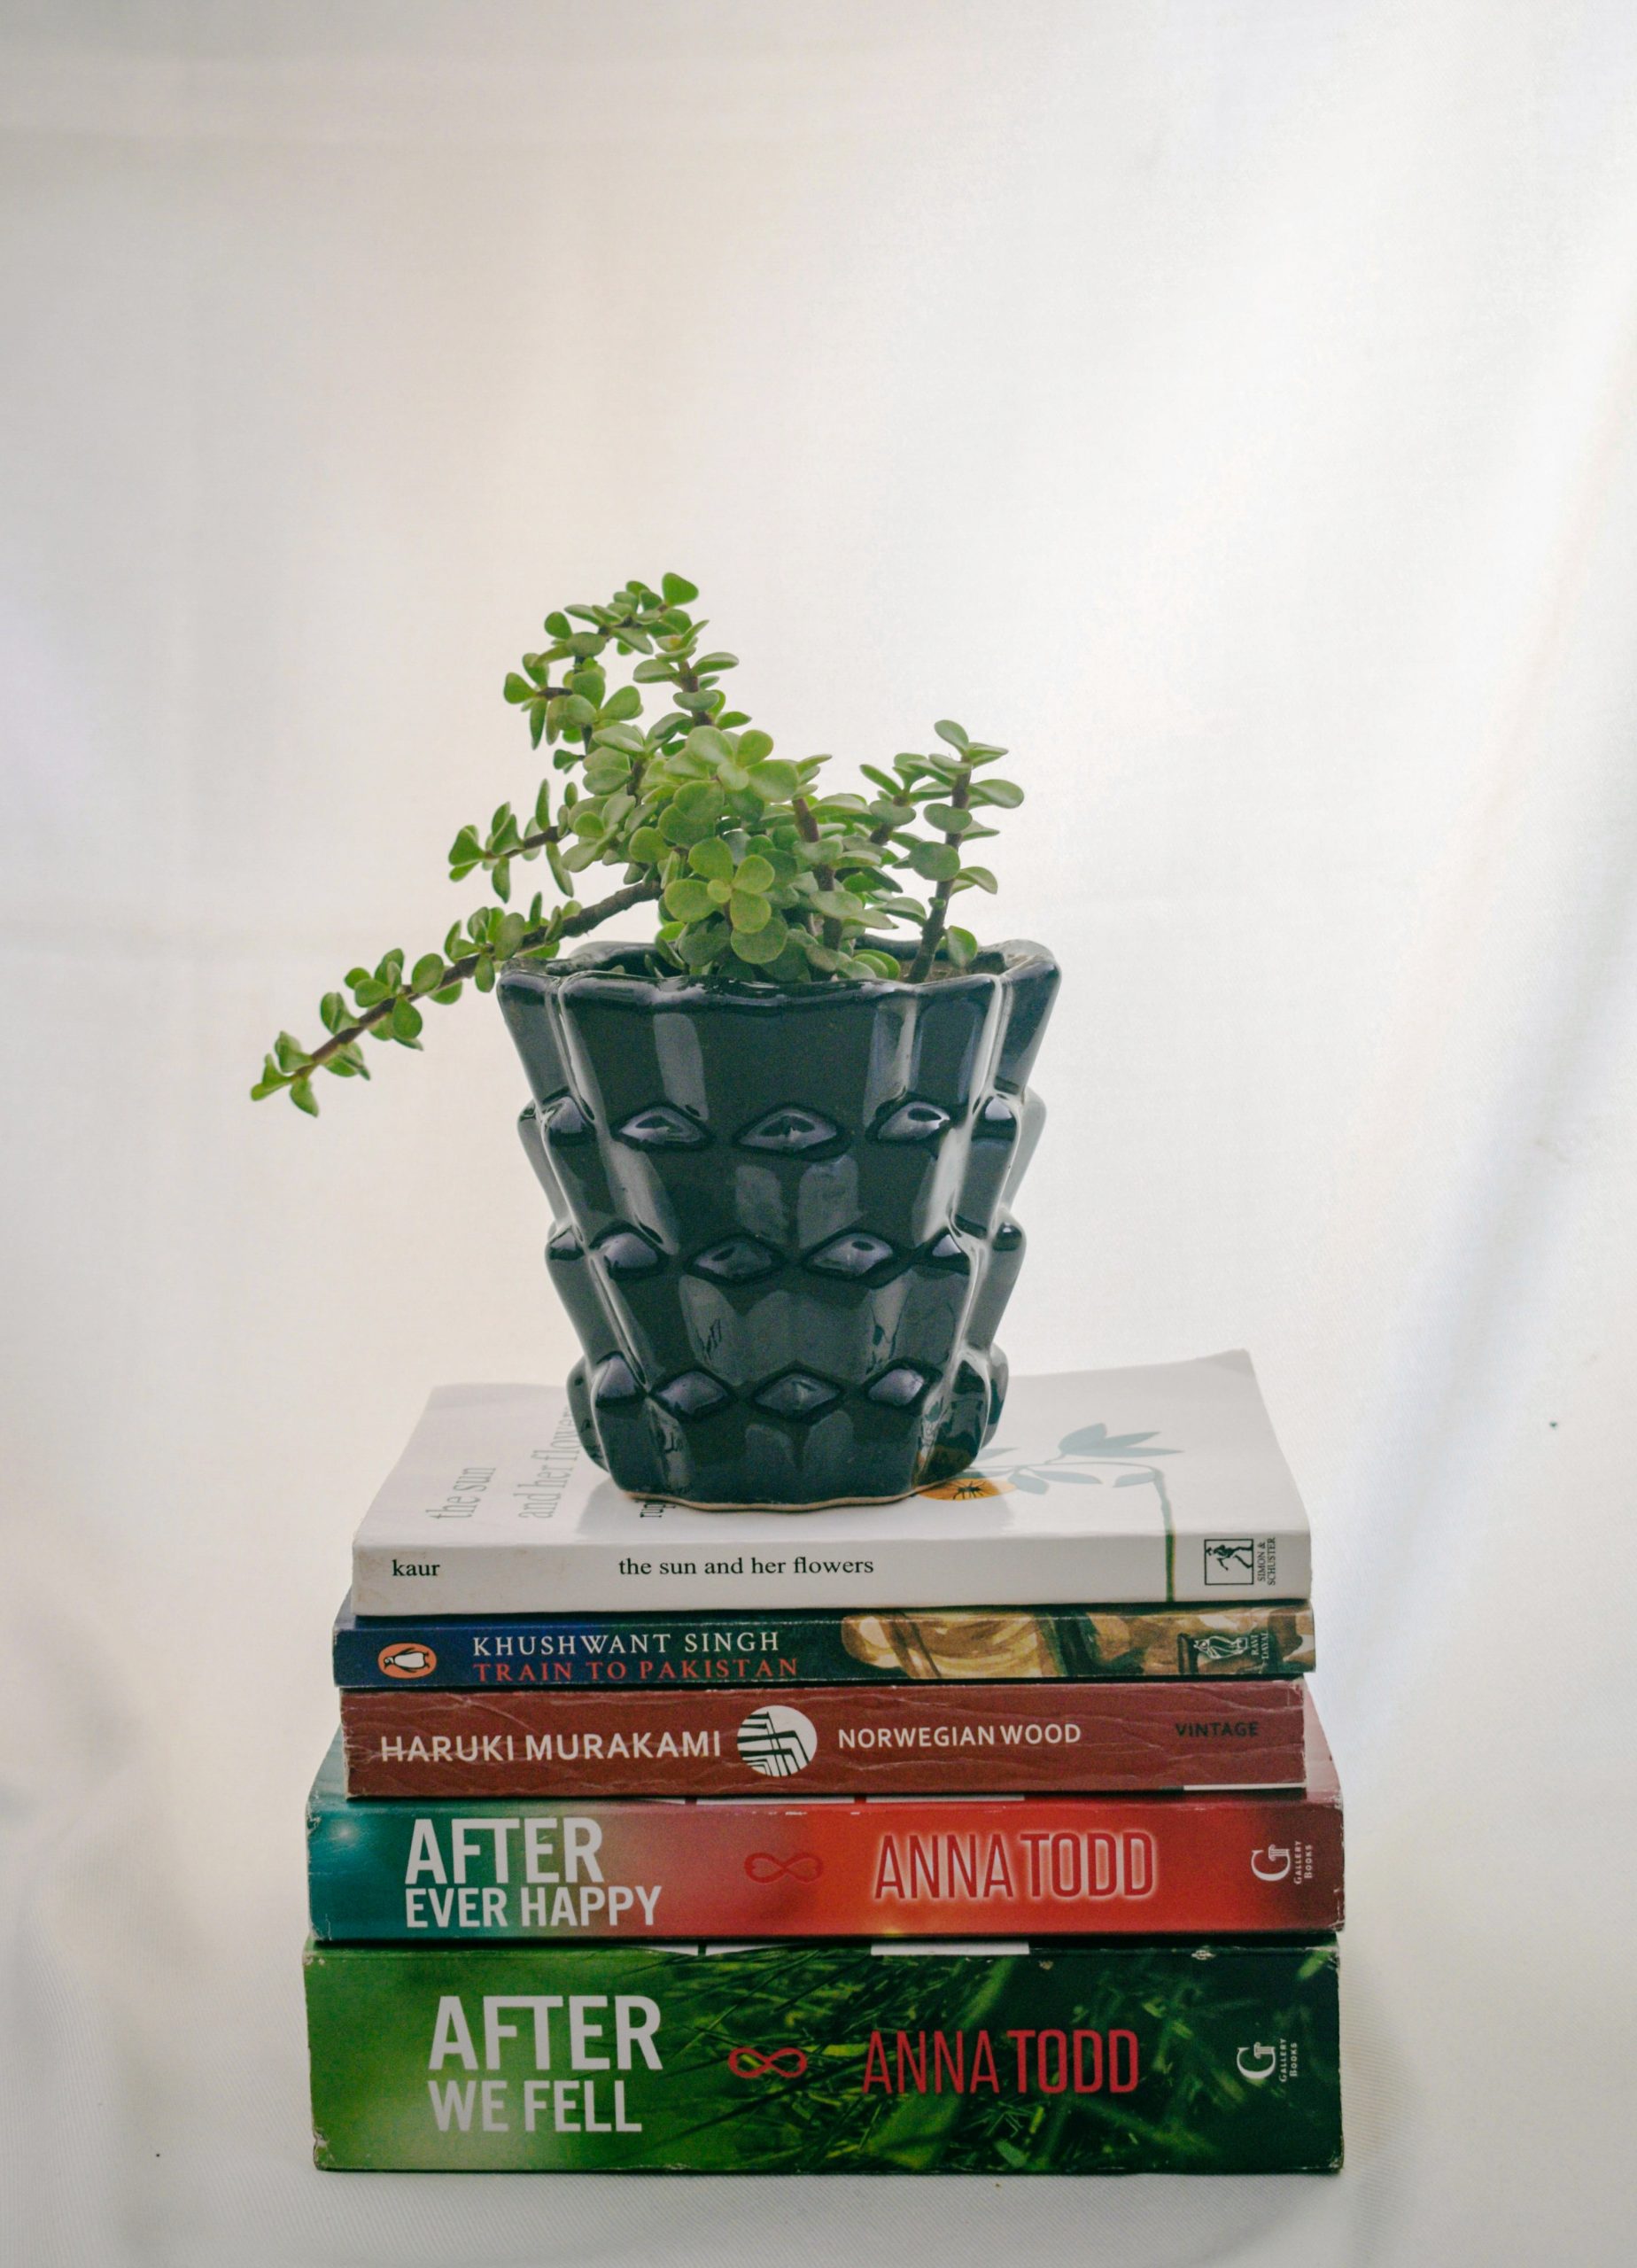 books and plant